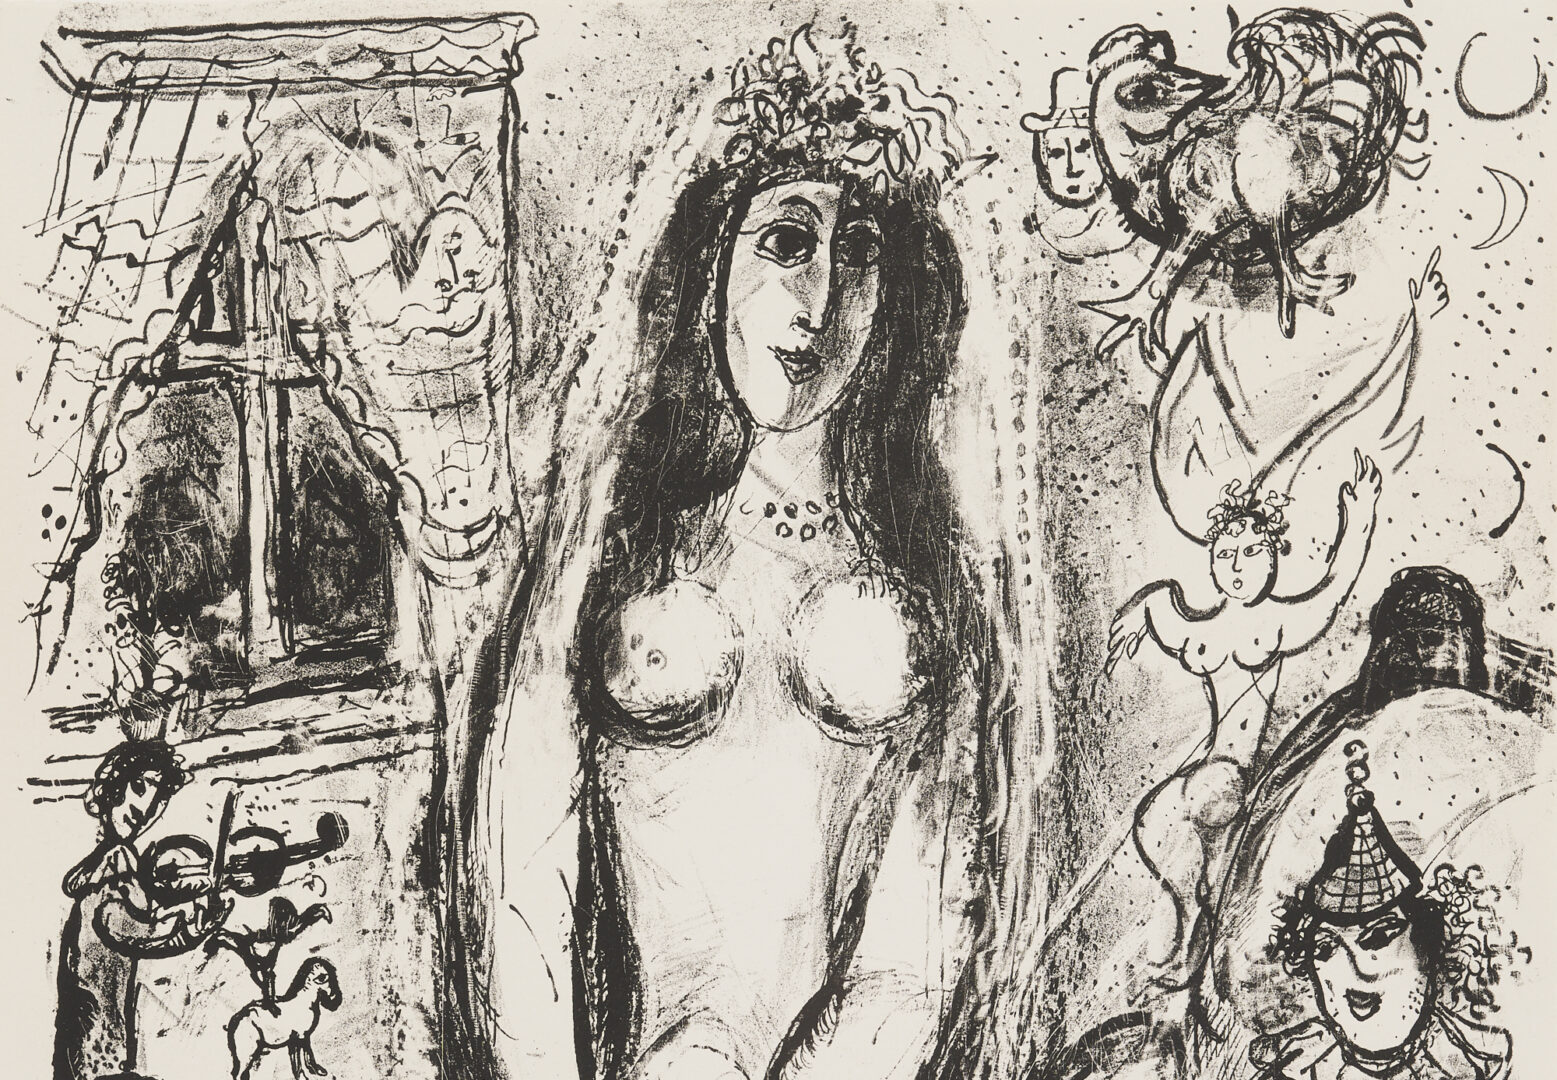 Lot 700: Marc Chagall Black/White Litho from The Circus, 1967, M. 520